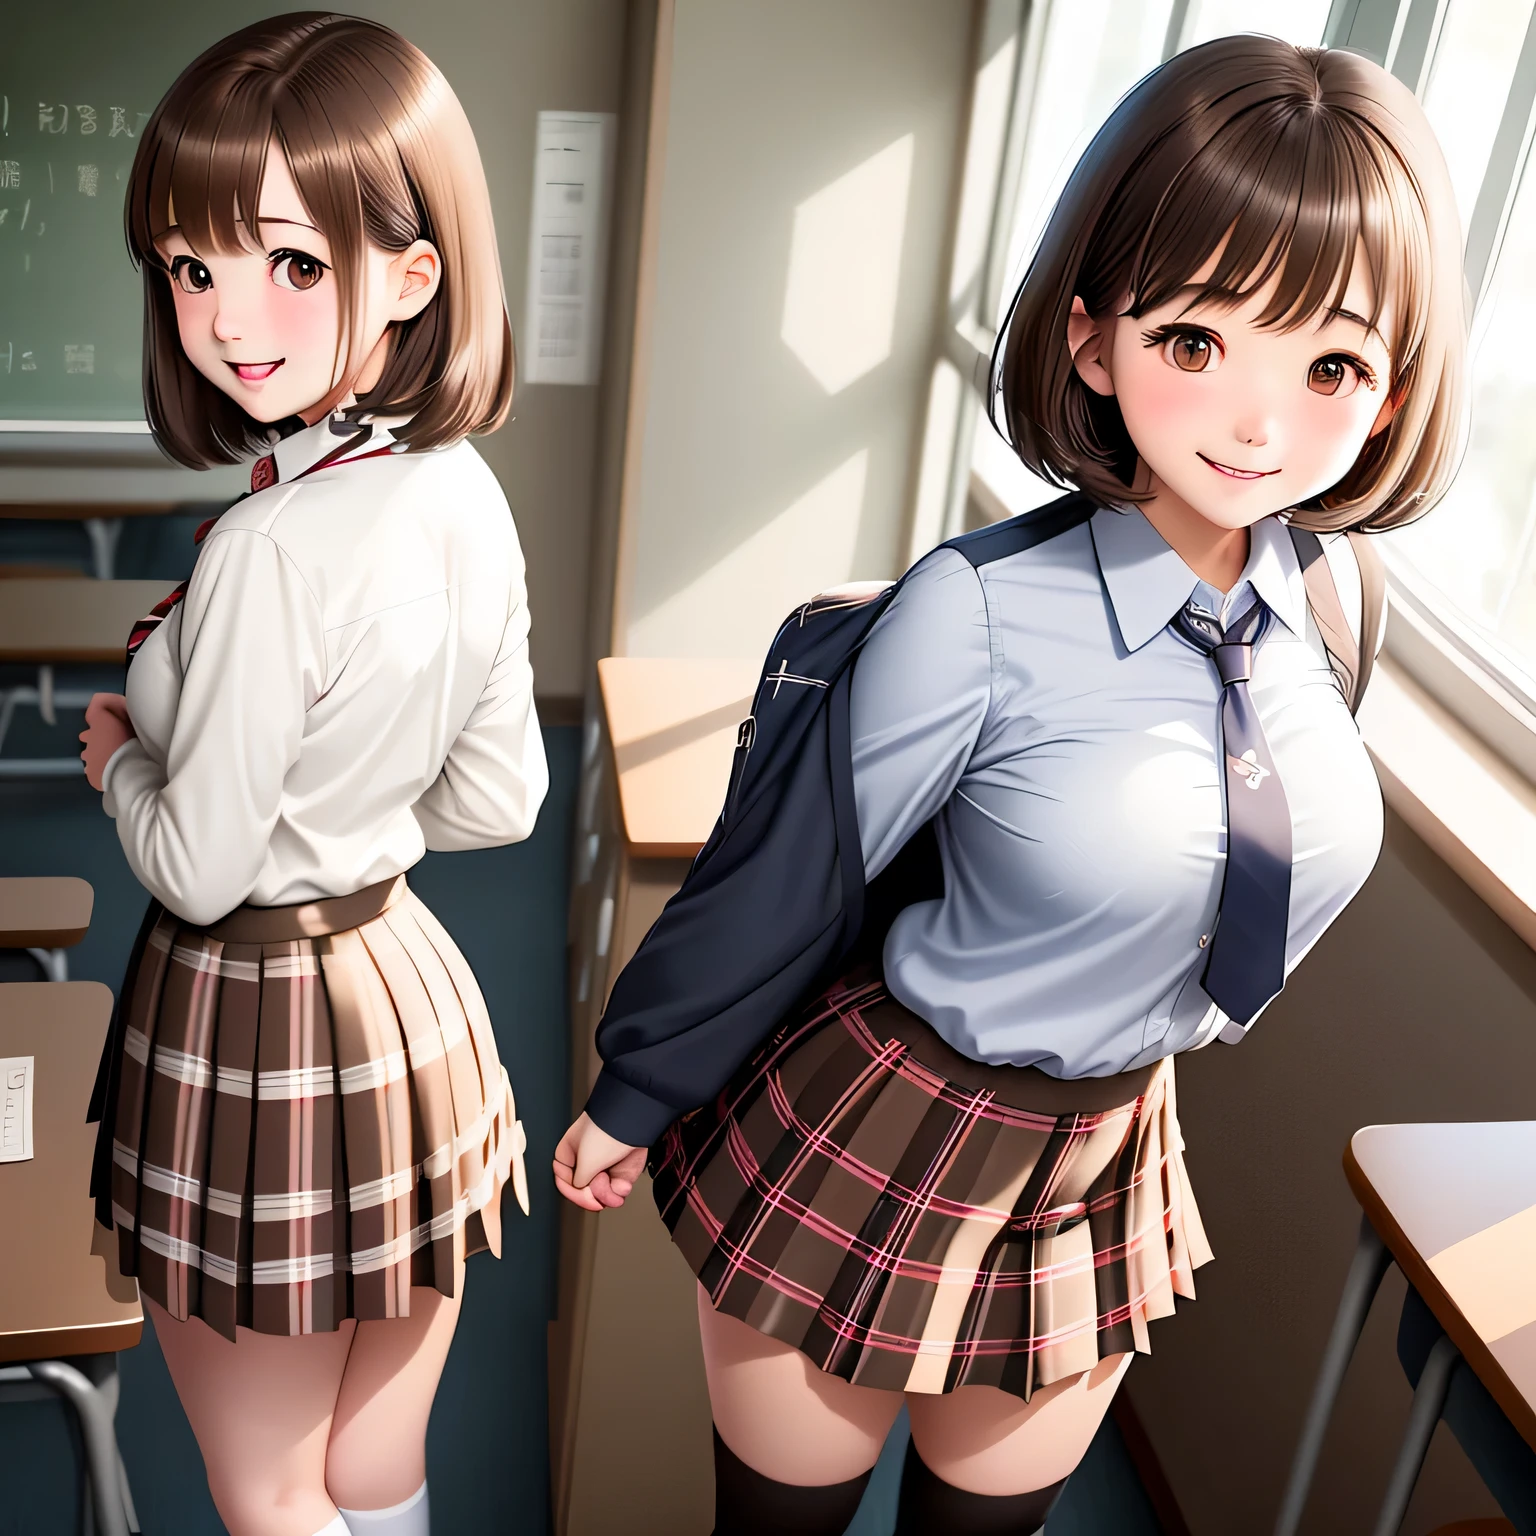 uniform、knee high socks、brown hair、short hair、cute face、classroom、girls high 、Commemorative photo with four high school girls、tight uniform、plaid skirt、white shirt、tie、lady lady、smile、One person is shotgun、Rear view、one person looks back、embarrassed look、